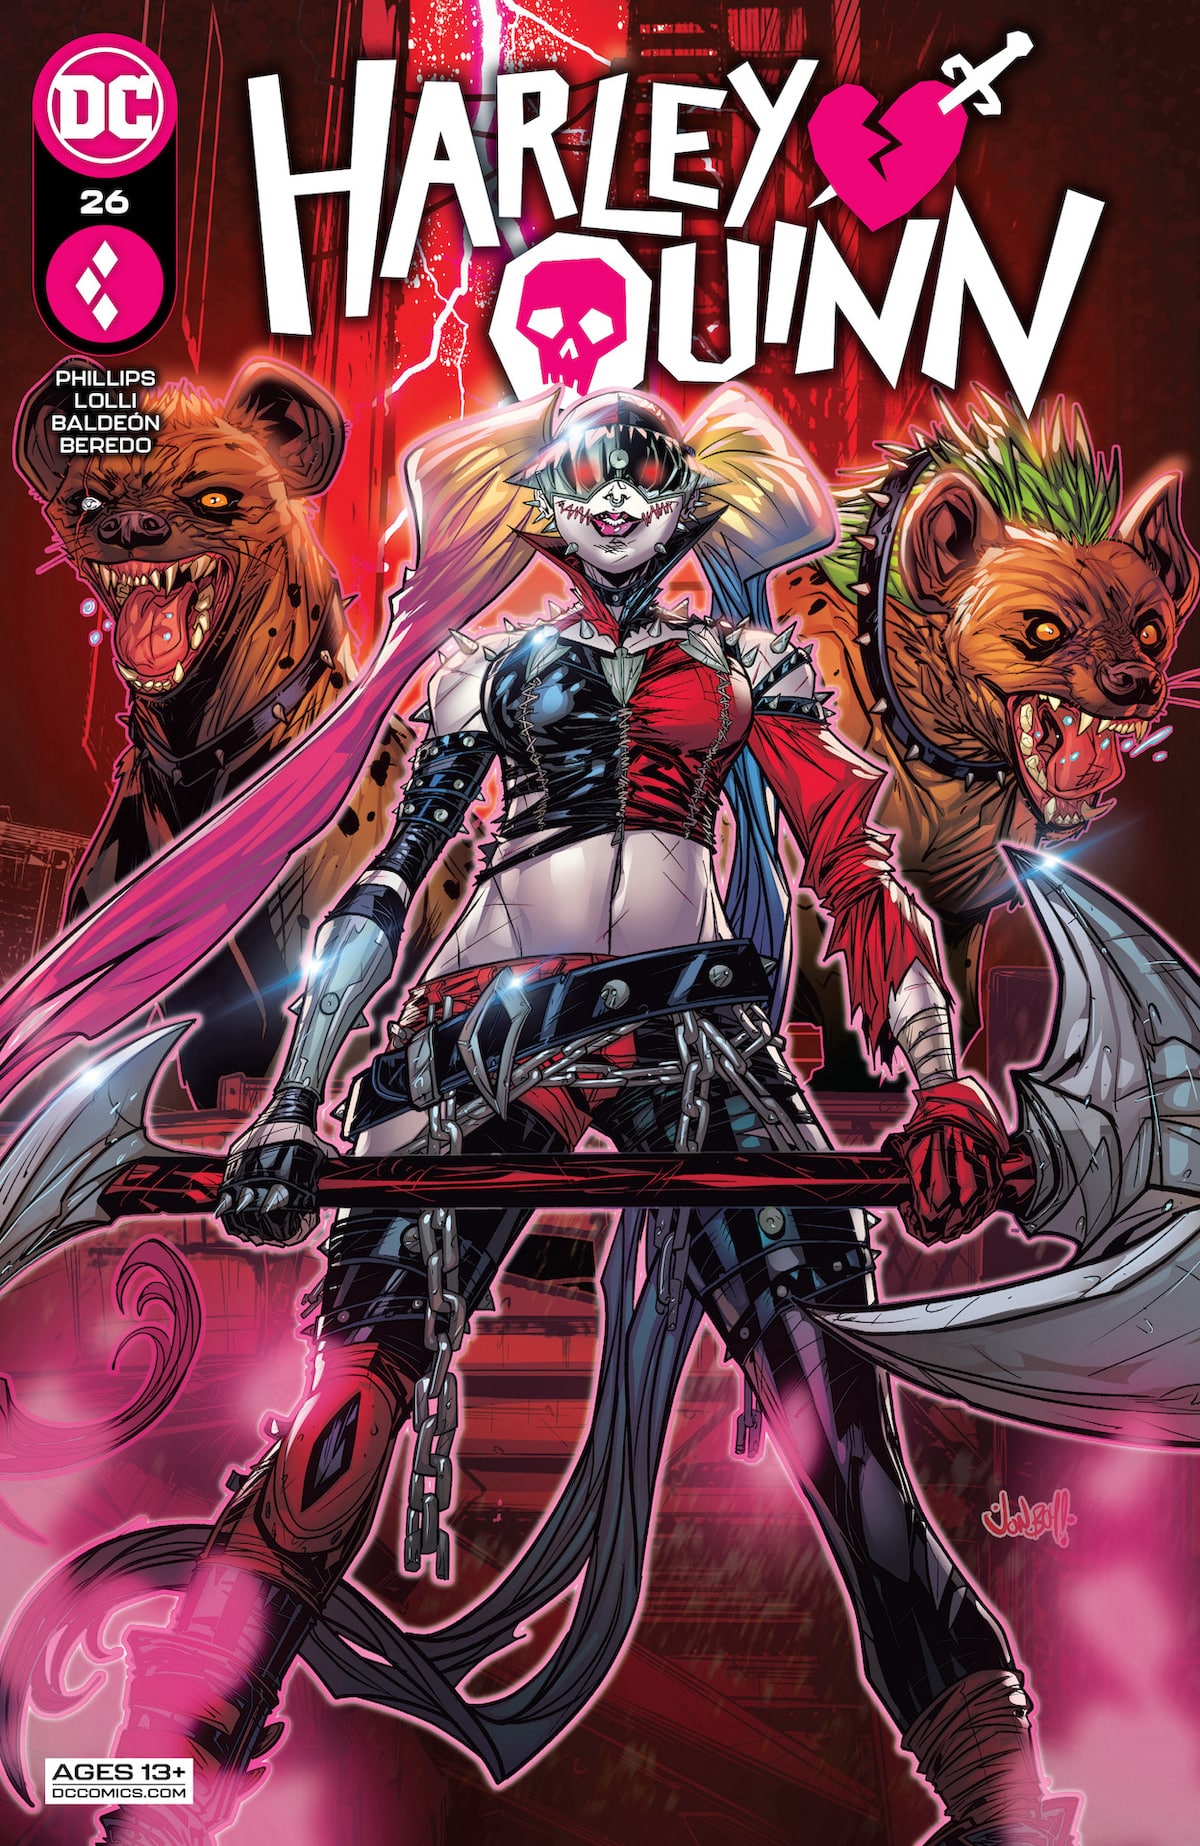 DC Preview: Harley Quinn #26